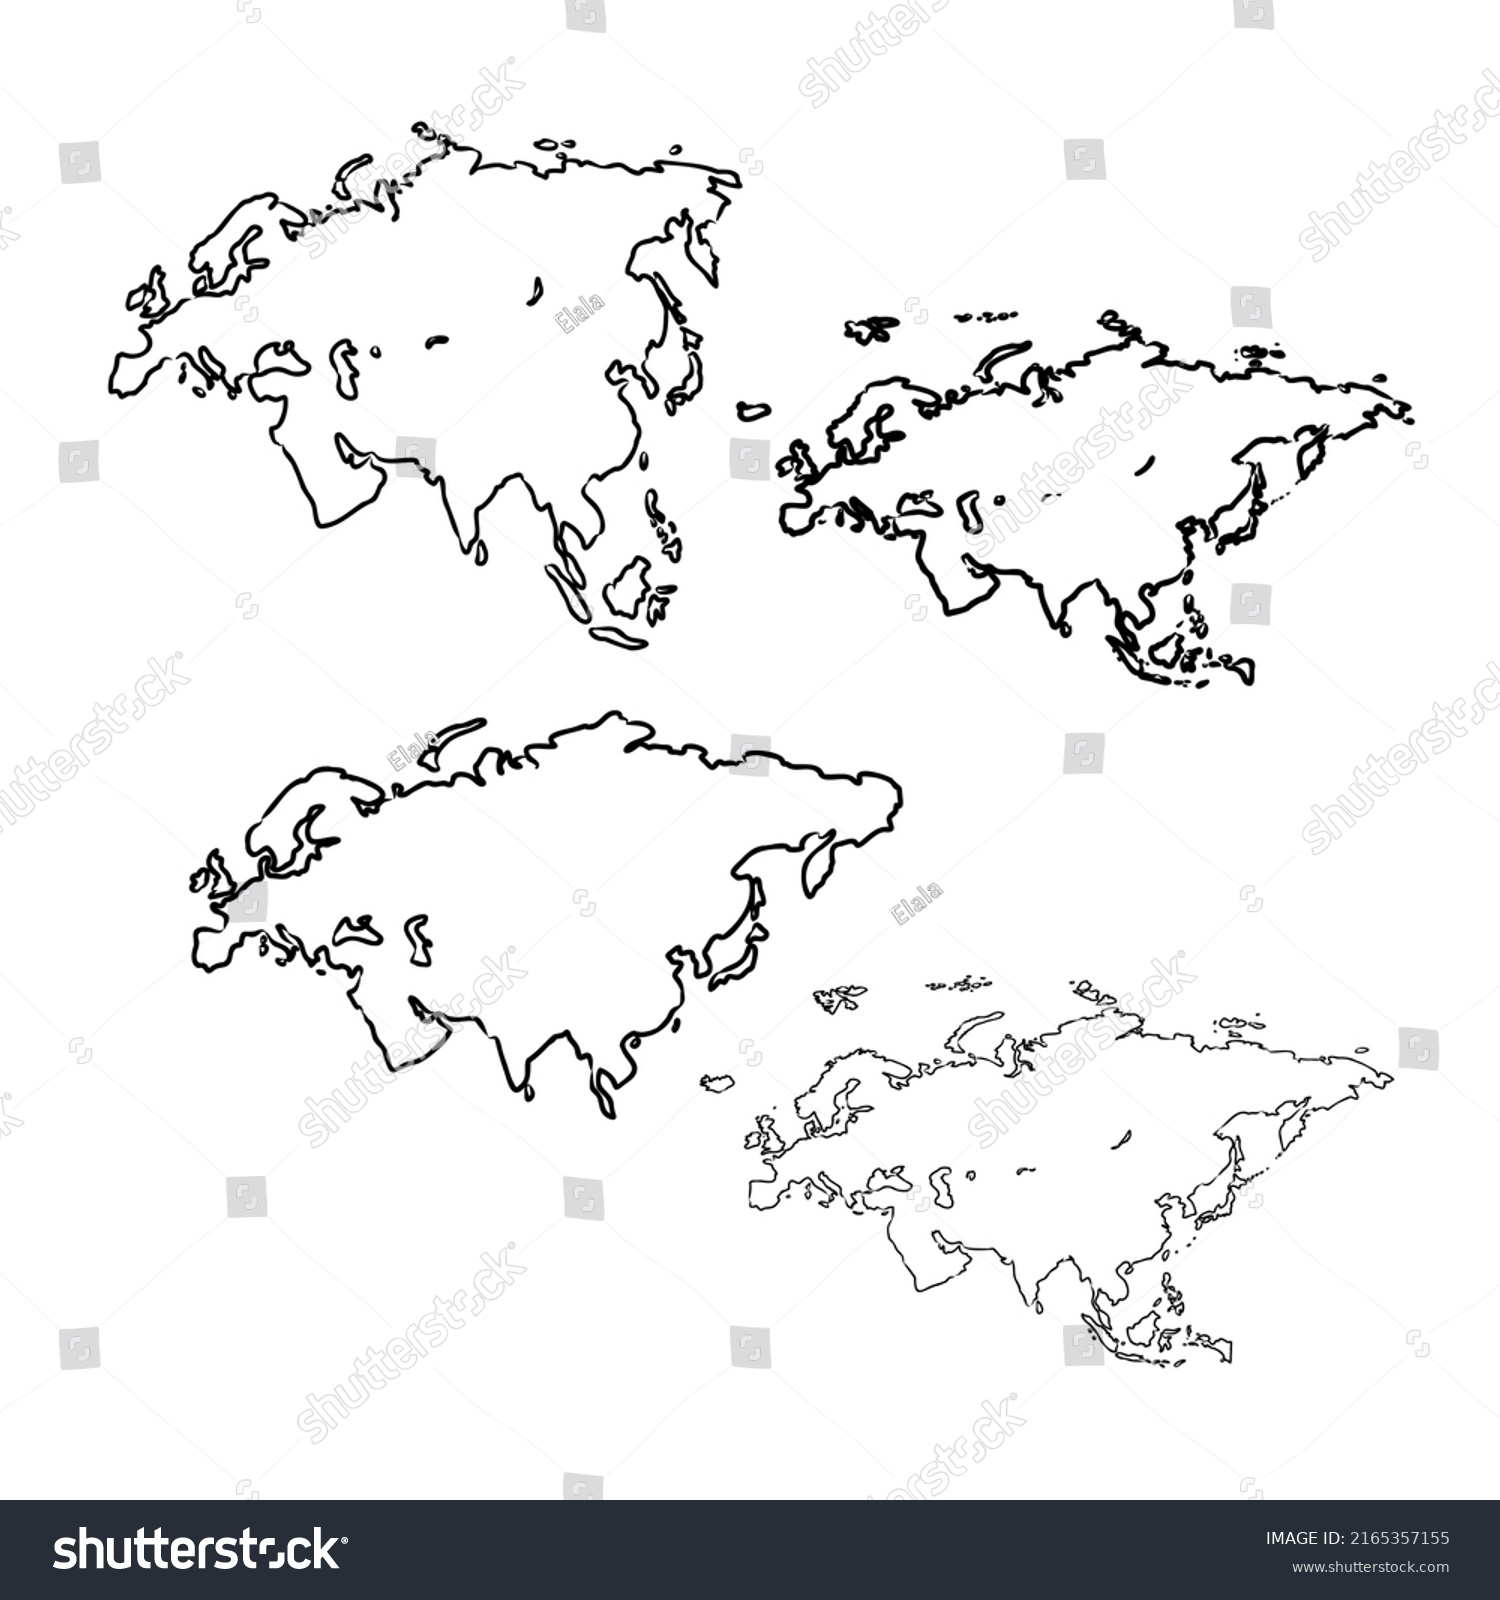 Eurasia Continent Contours Countries Vector Drawing Stock Vector Royalty Free 2165357155 5937